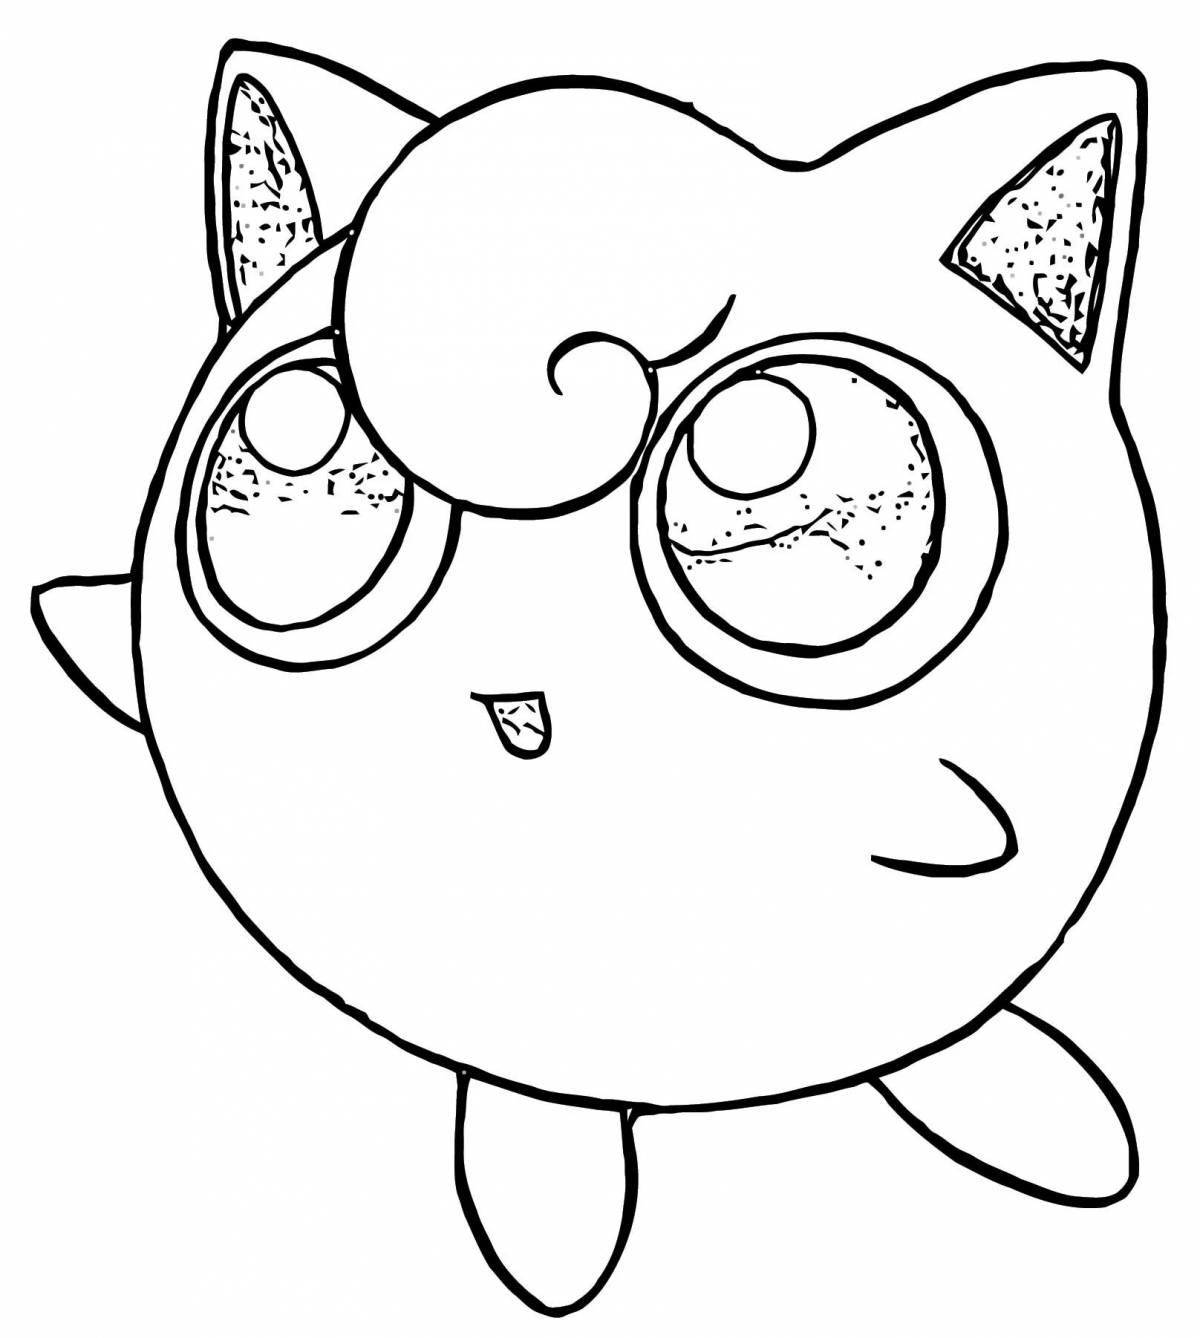 Jigglypuff exciting coloring book